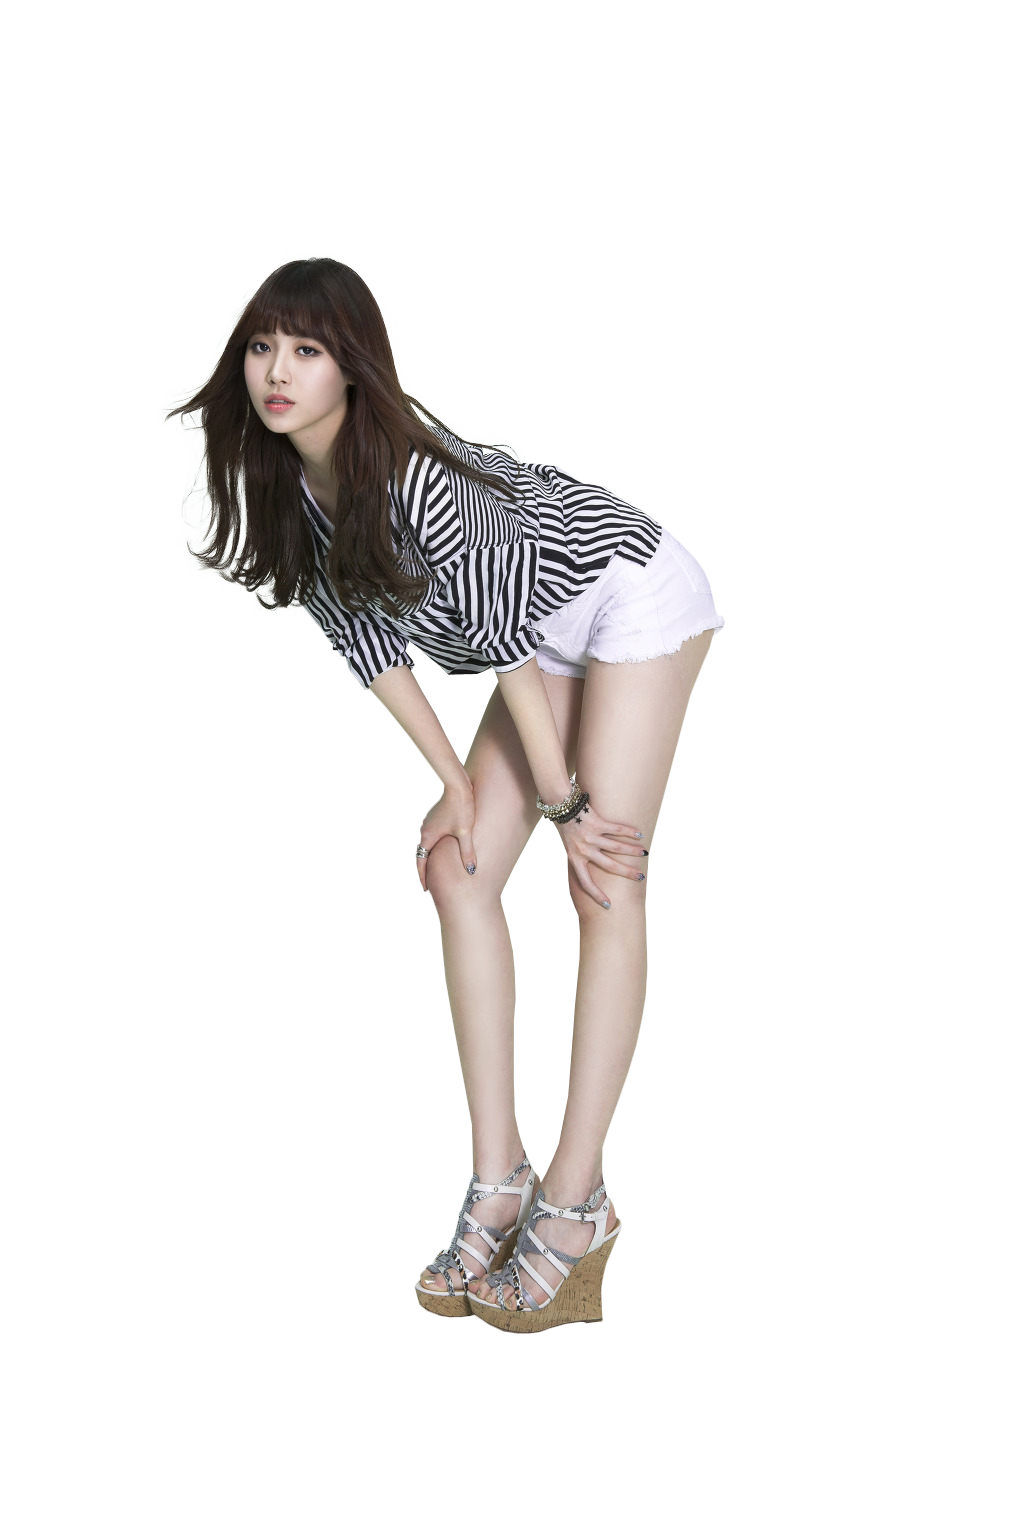 . PlusPng.com Girl PNG #6 by 